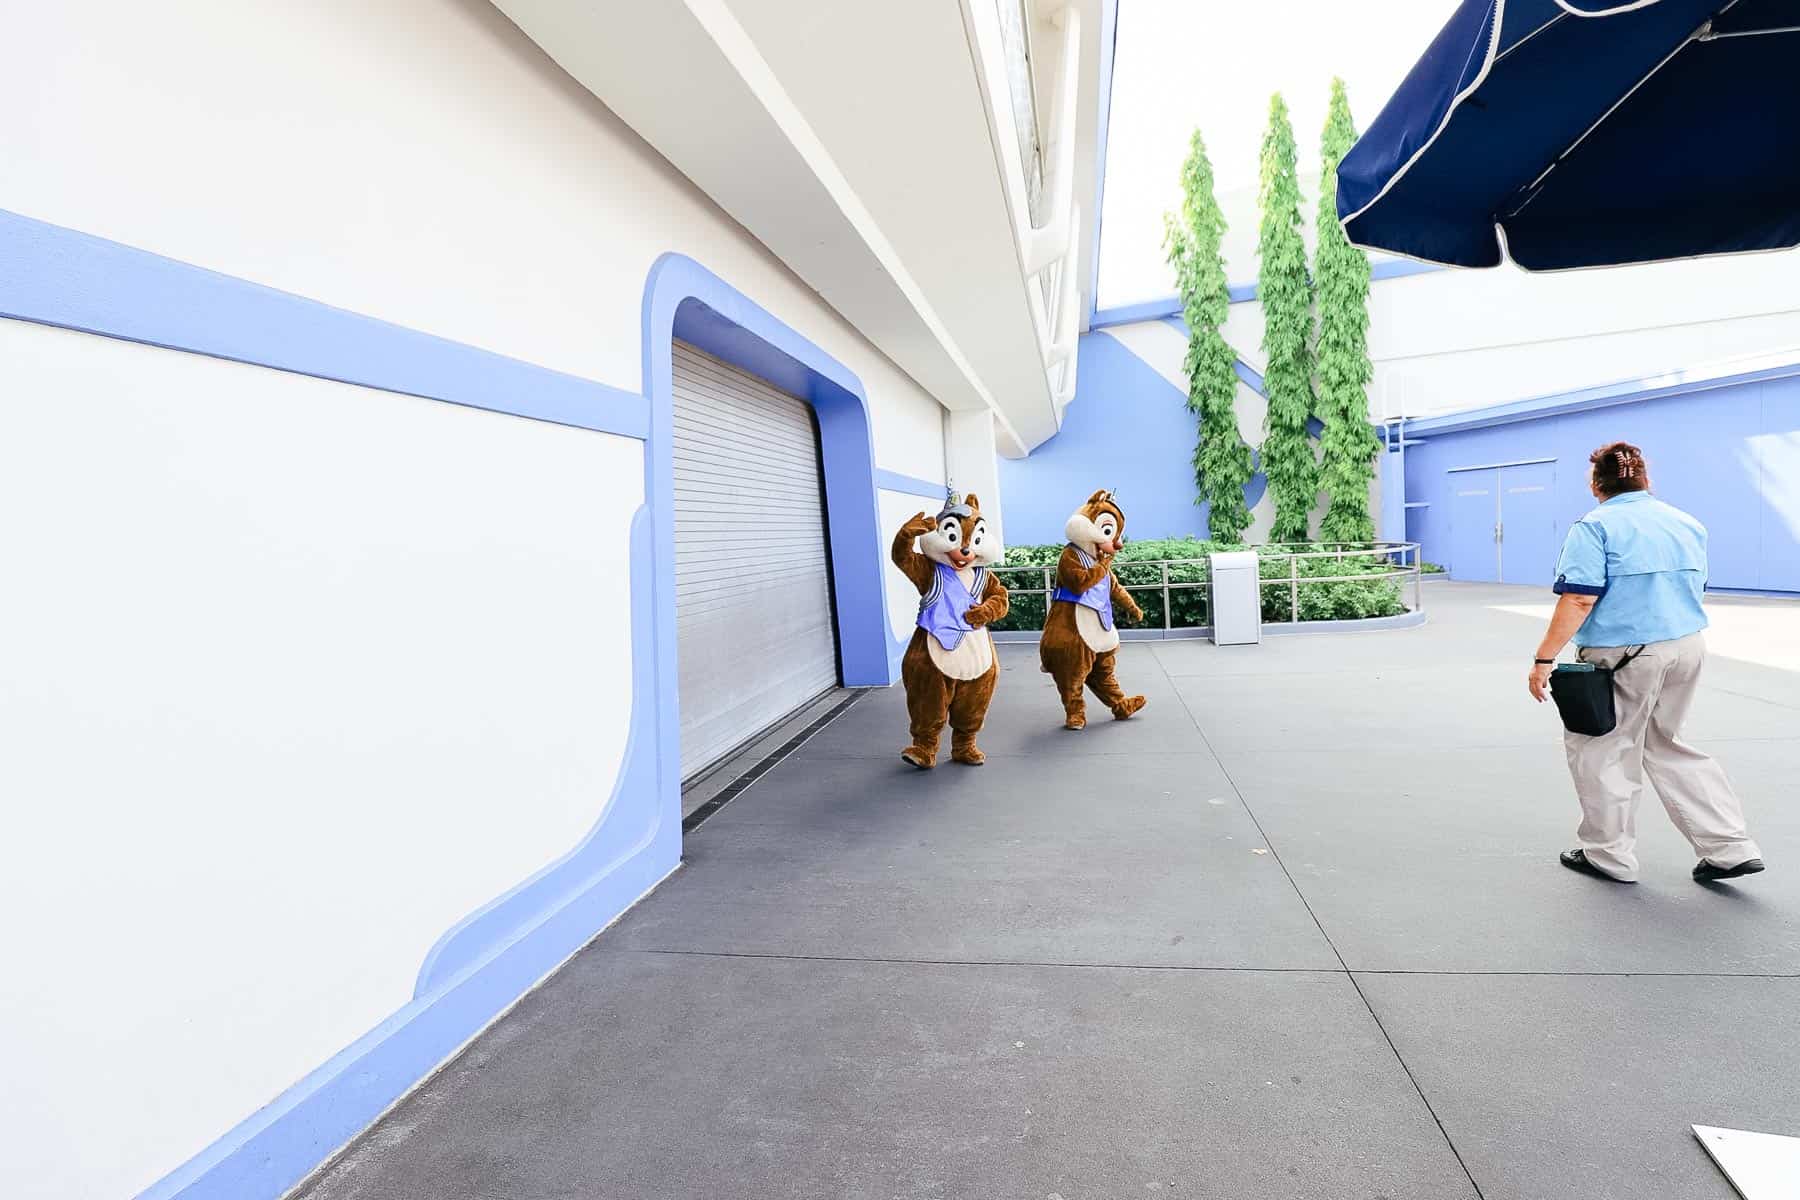 Chip and Dale are preparing to leave and waving goodbye to guests.